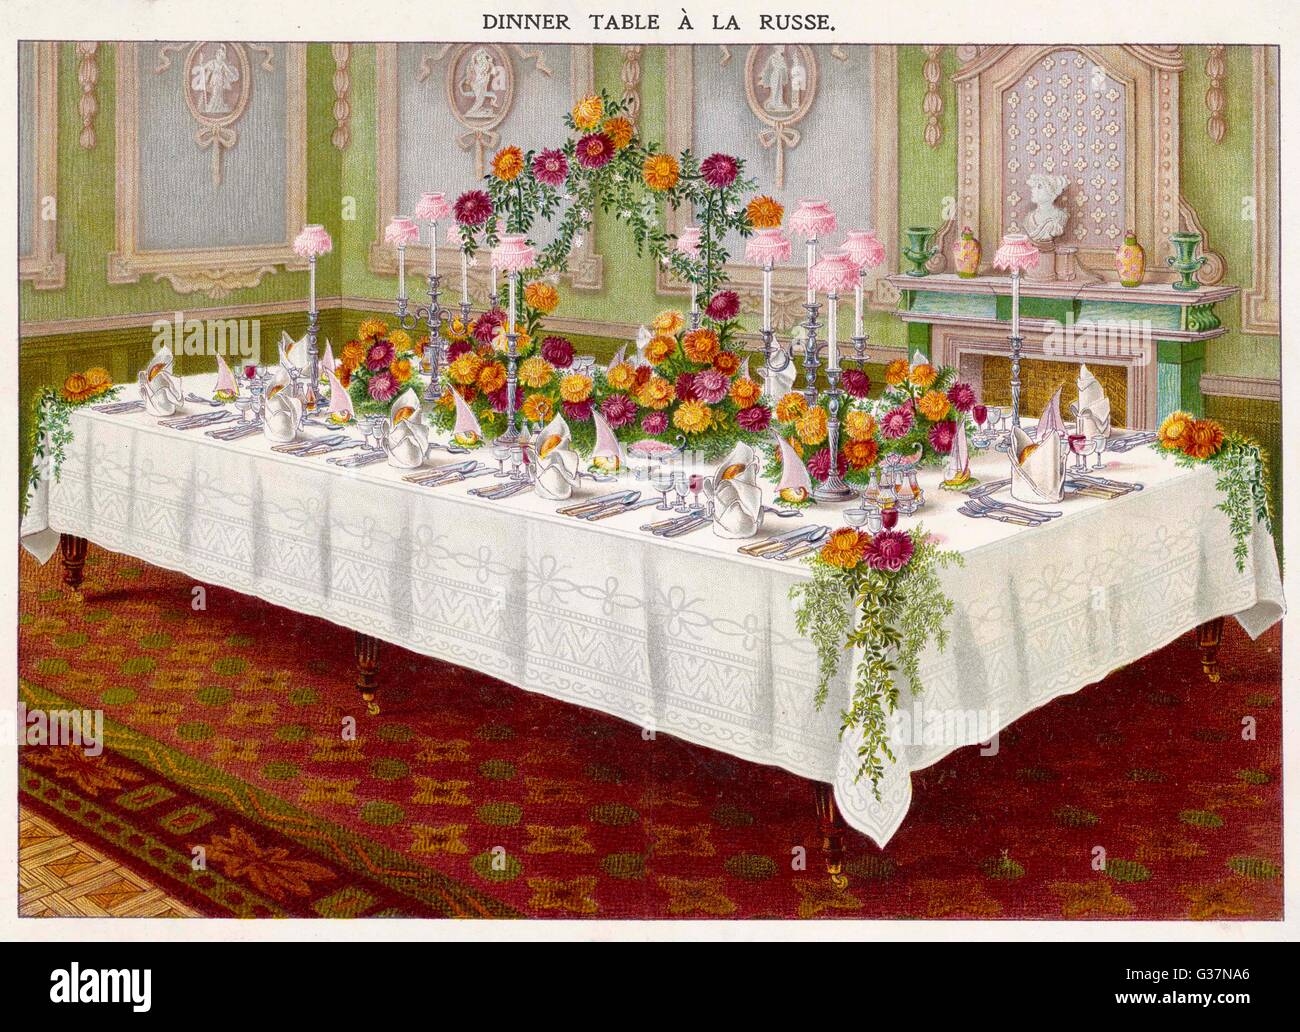 DINNER TABLE A LA RUSSE          Date: circa 1890 Stock Photo